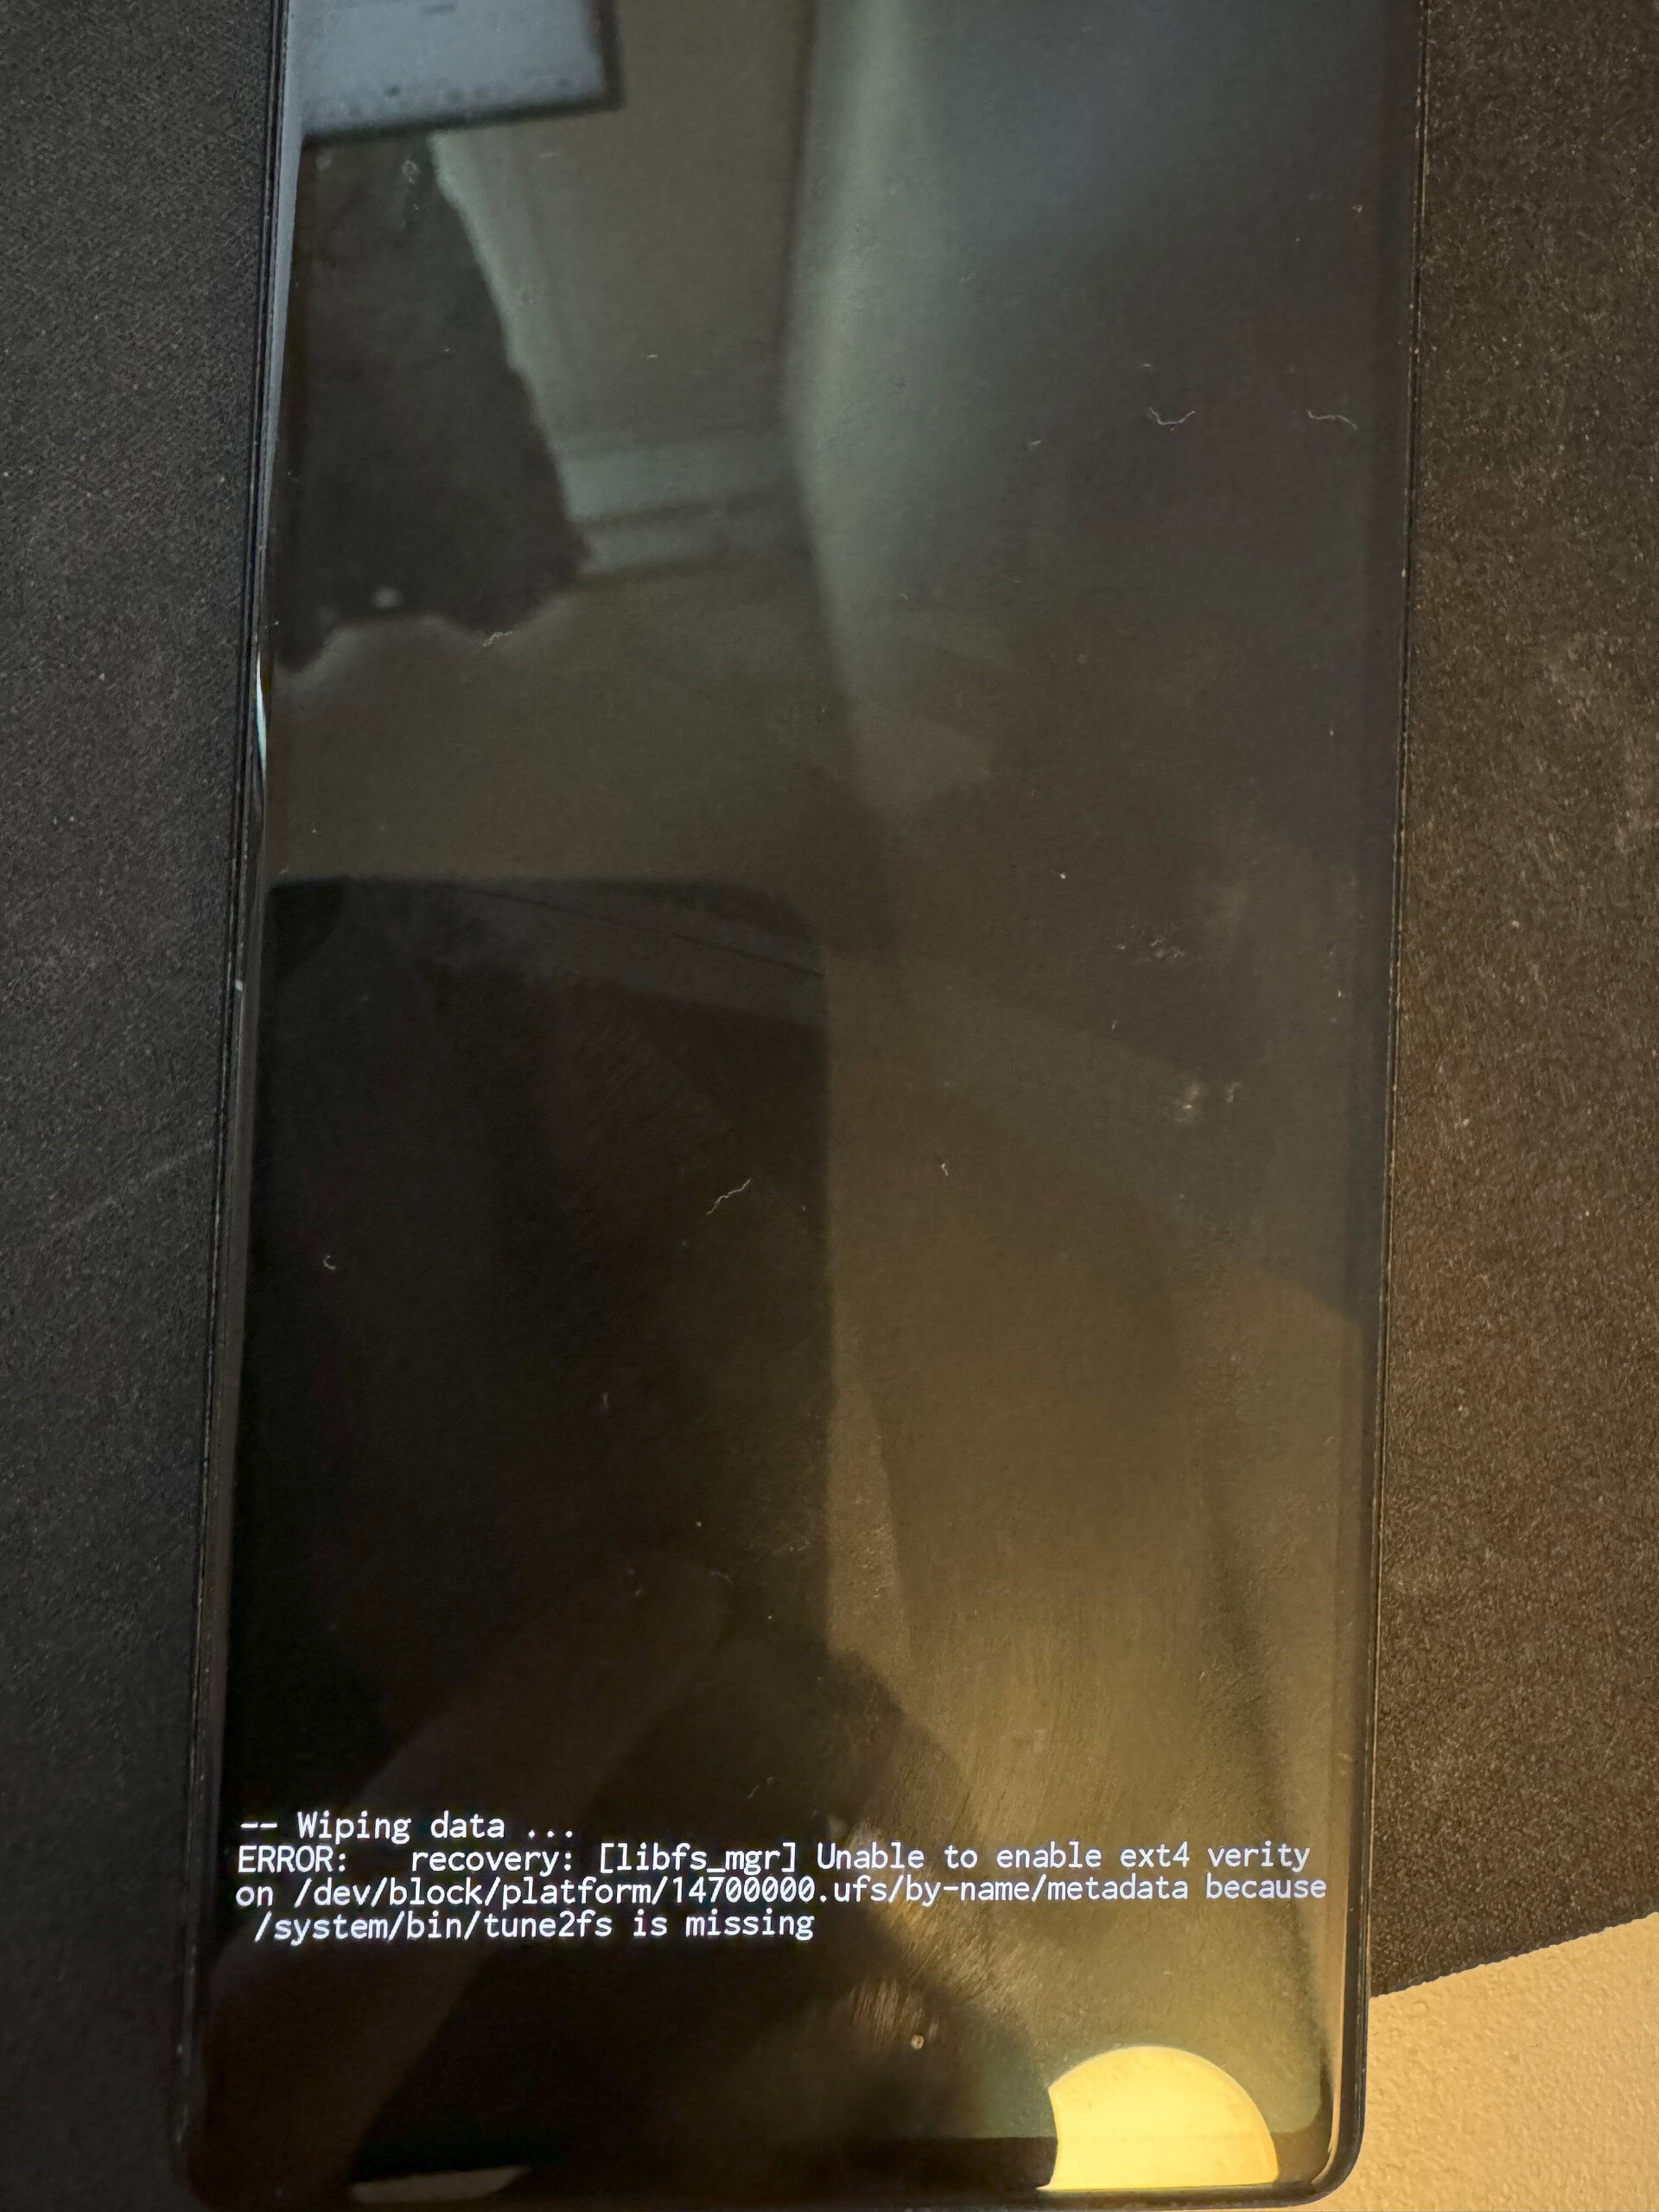 An image showing a bricked Google Pixel 6 with an error message on the screen.